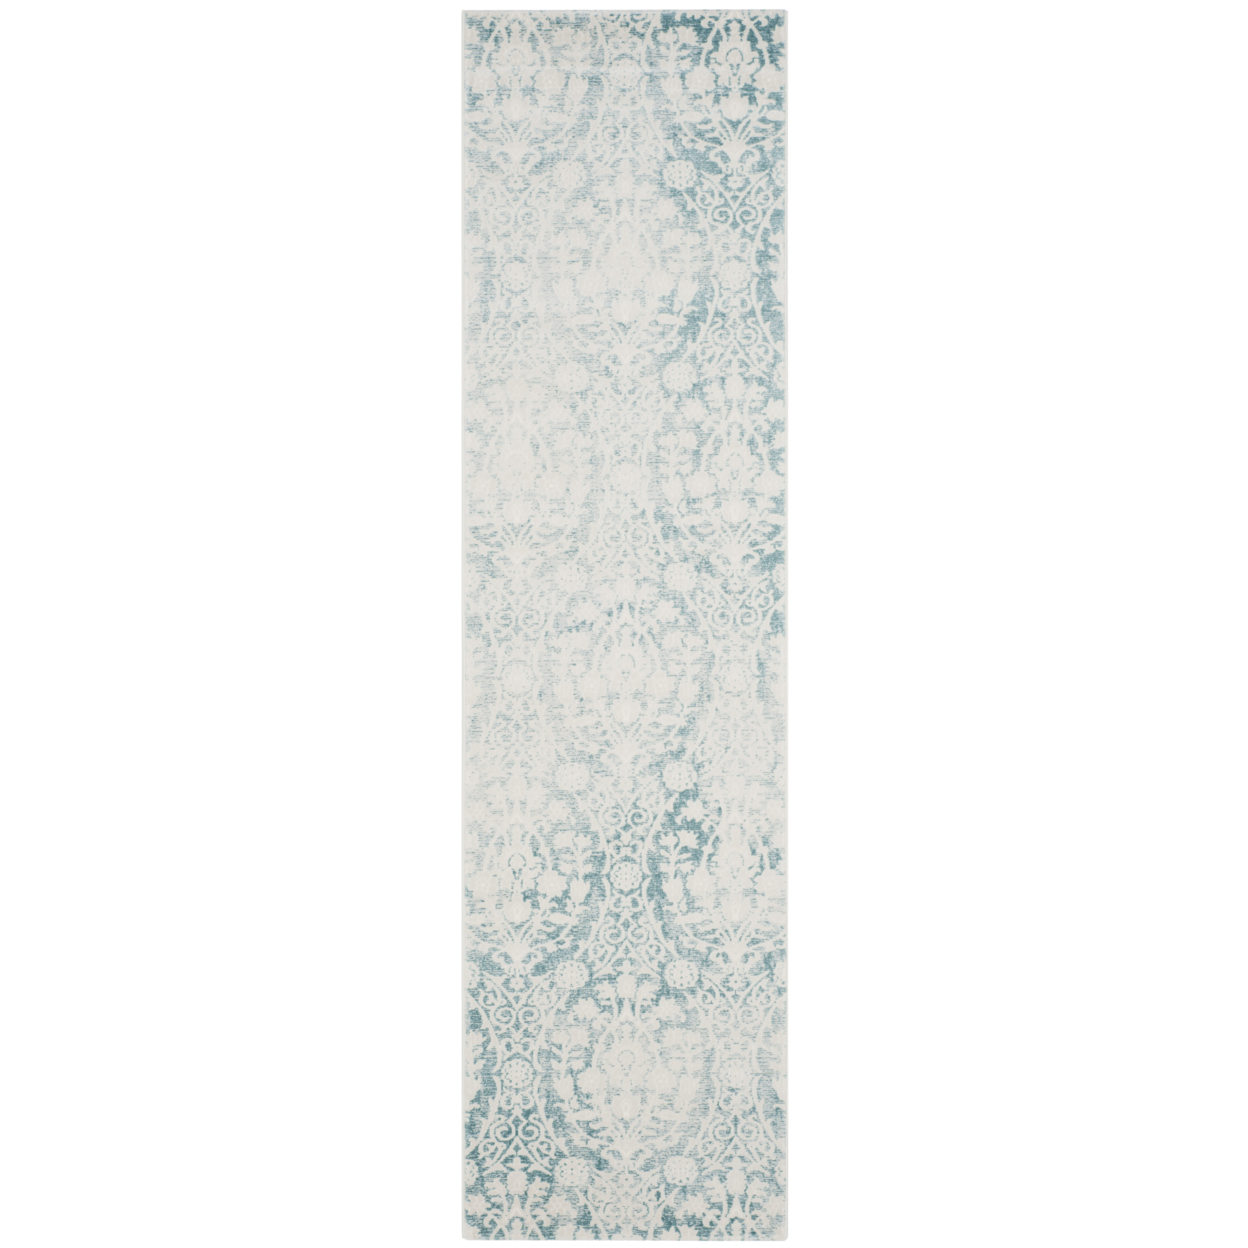 SAFAVIEH Passion Collection PAS403B Turquoise / Ivory Rug - 2' 2 X 6'